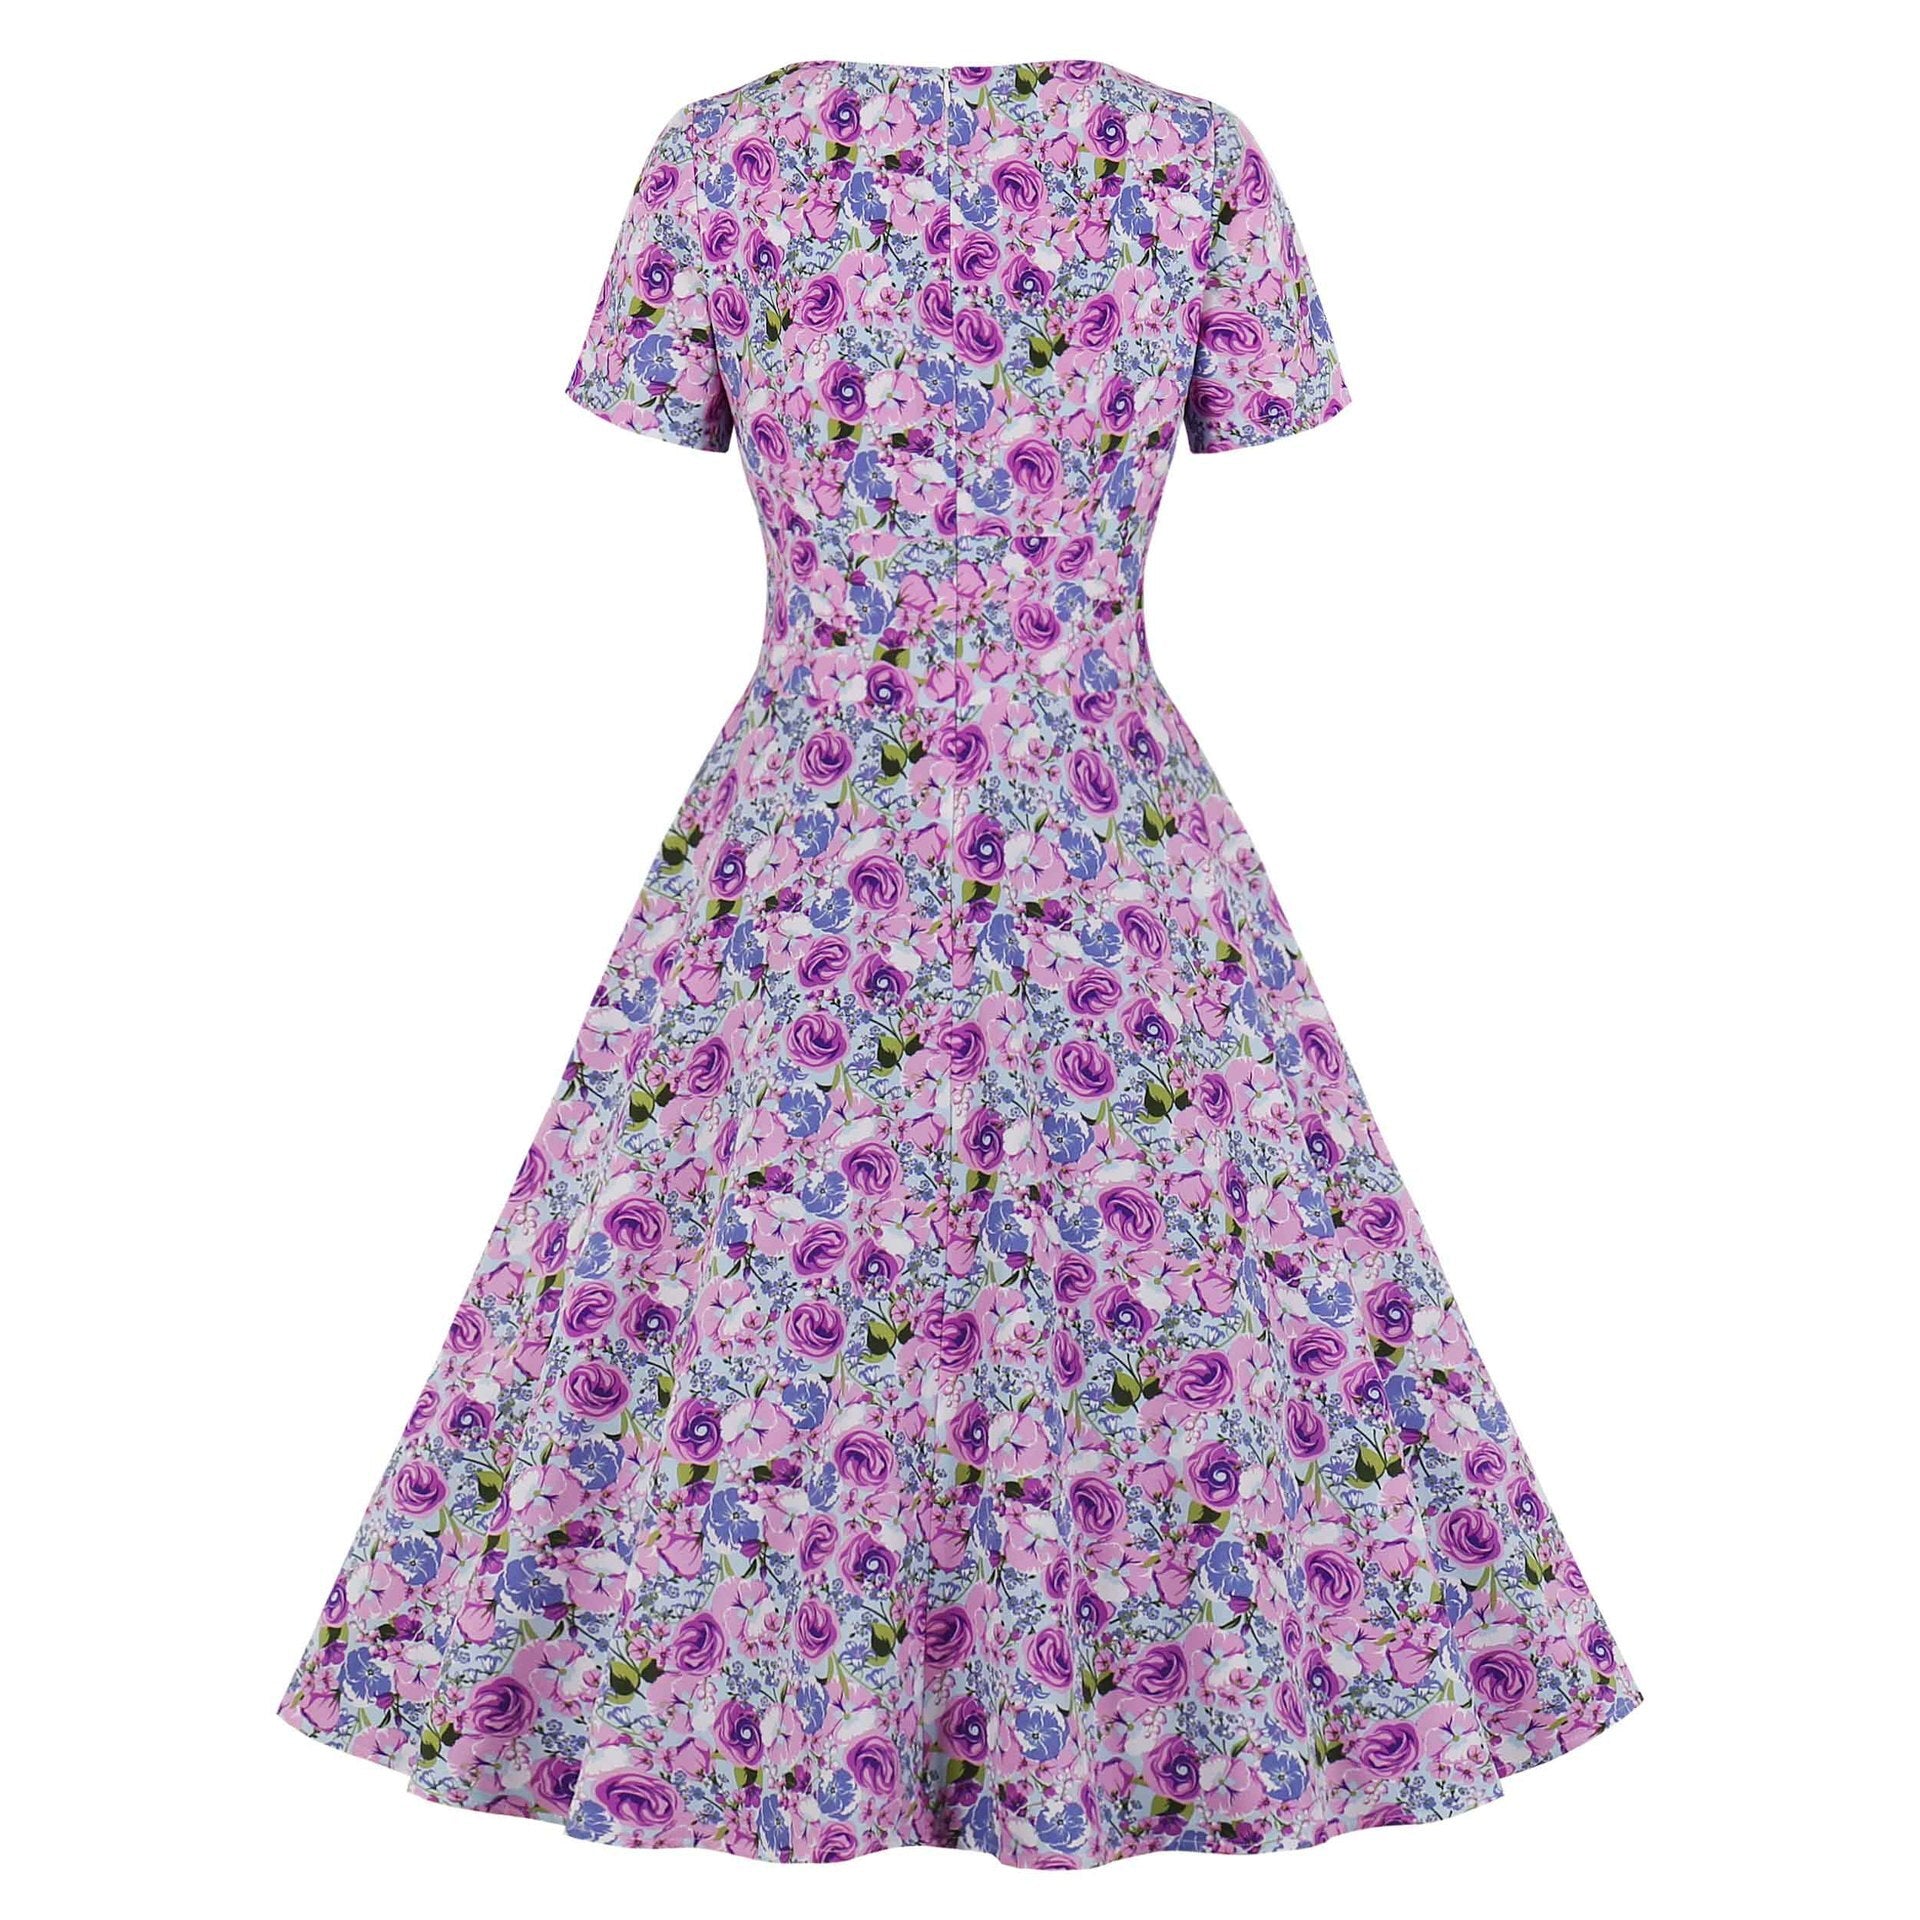 2021 Bohemian Beach Floral Women Casual Party Dress With Bow Short Sleeve 50s 60s Big Swing Rocakbilly Pin Up Vintage Sundress